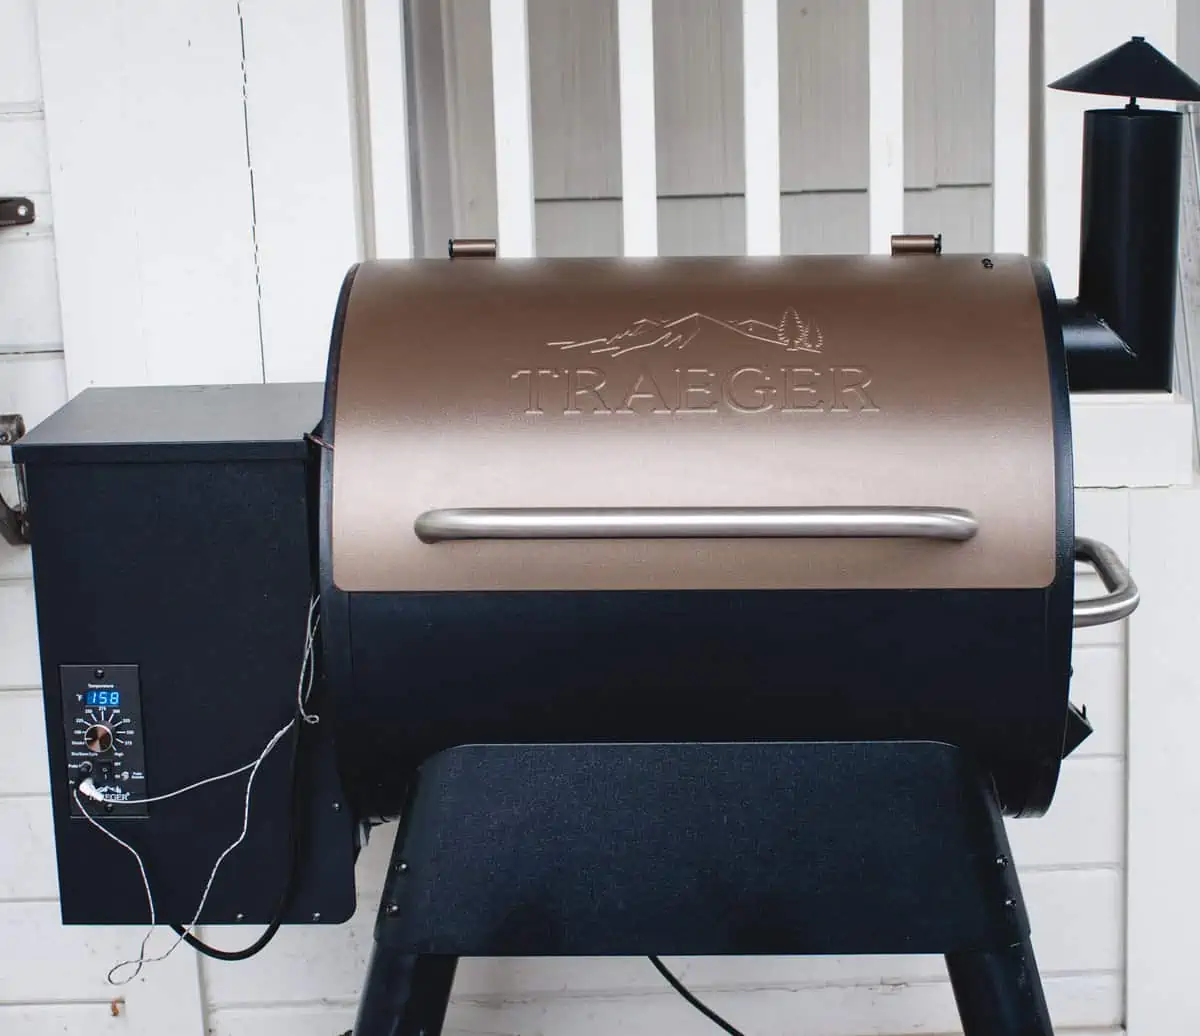 Traeger grill on patio